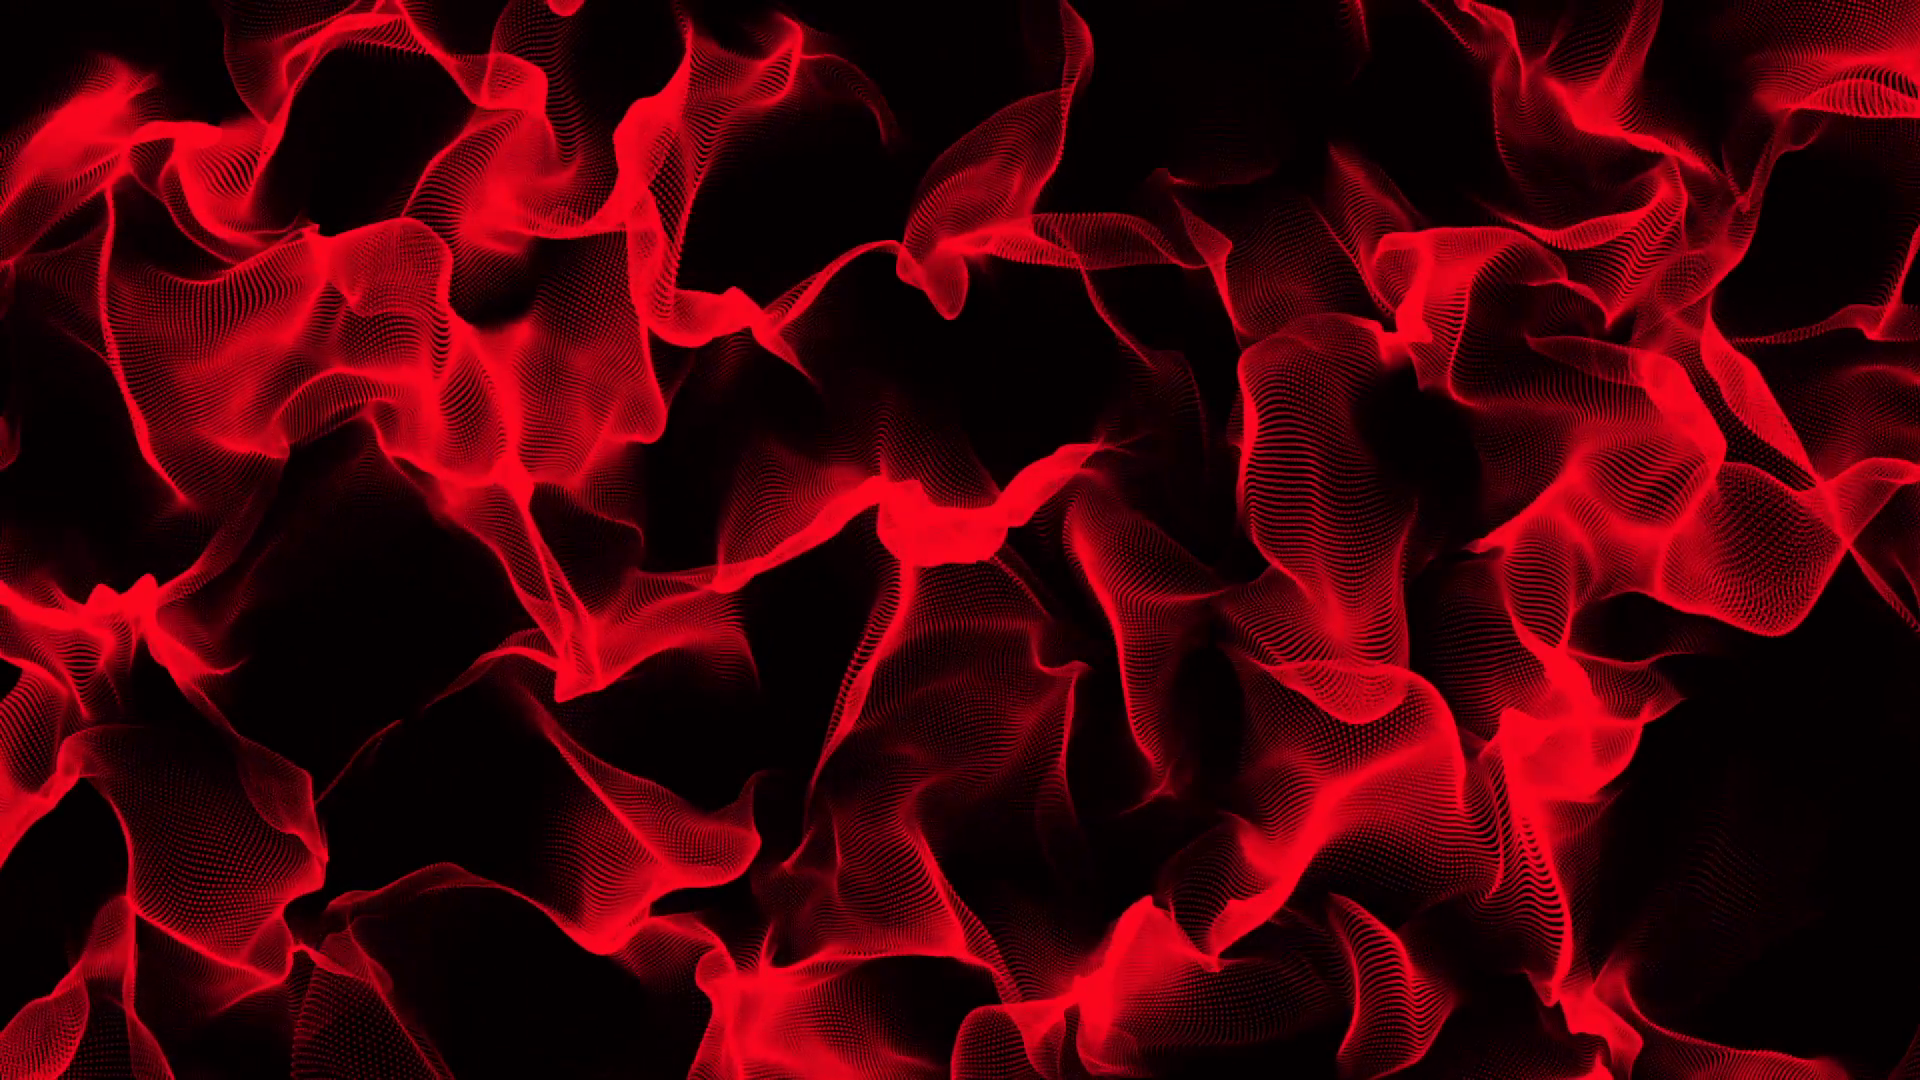 Abstract Red Flames 1 Motion Background - Videoblocks